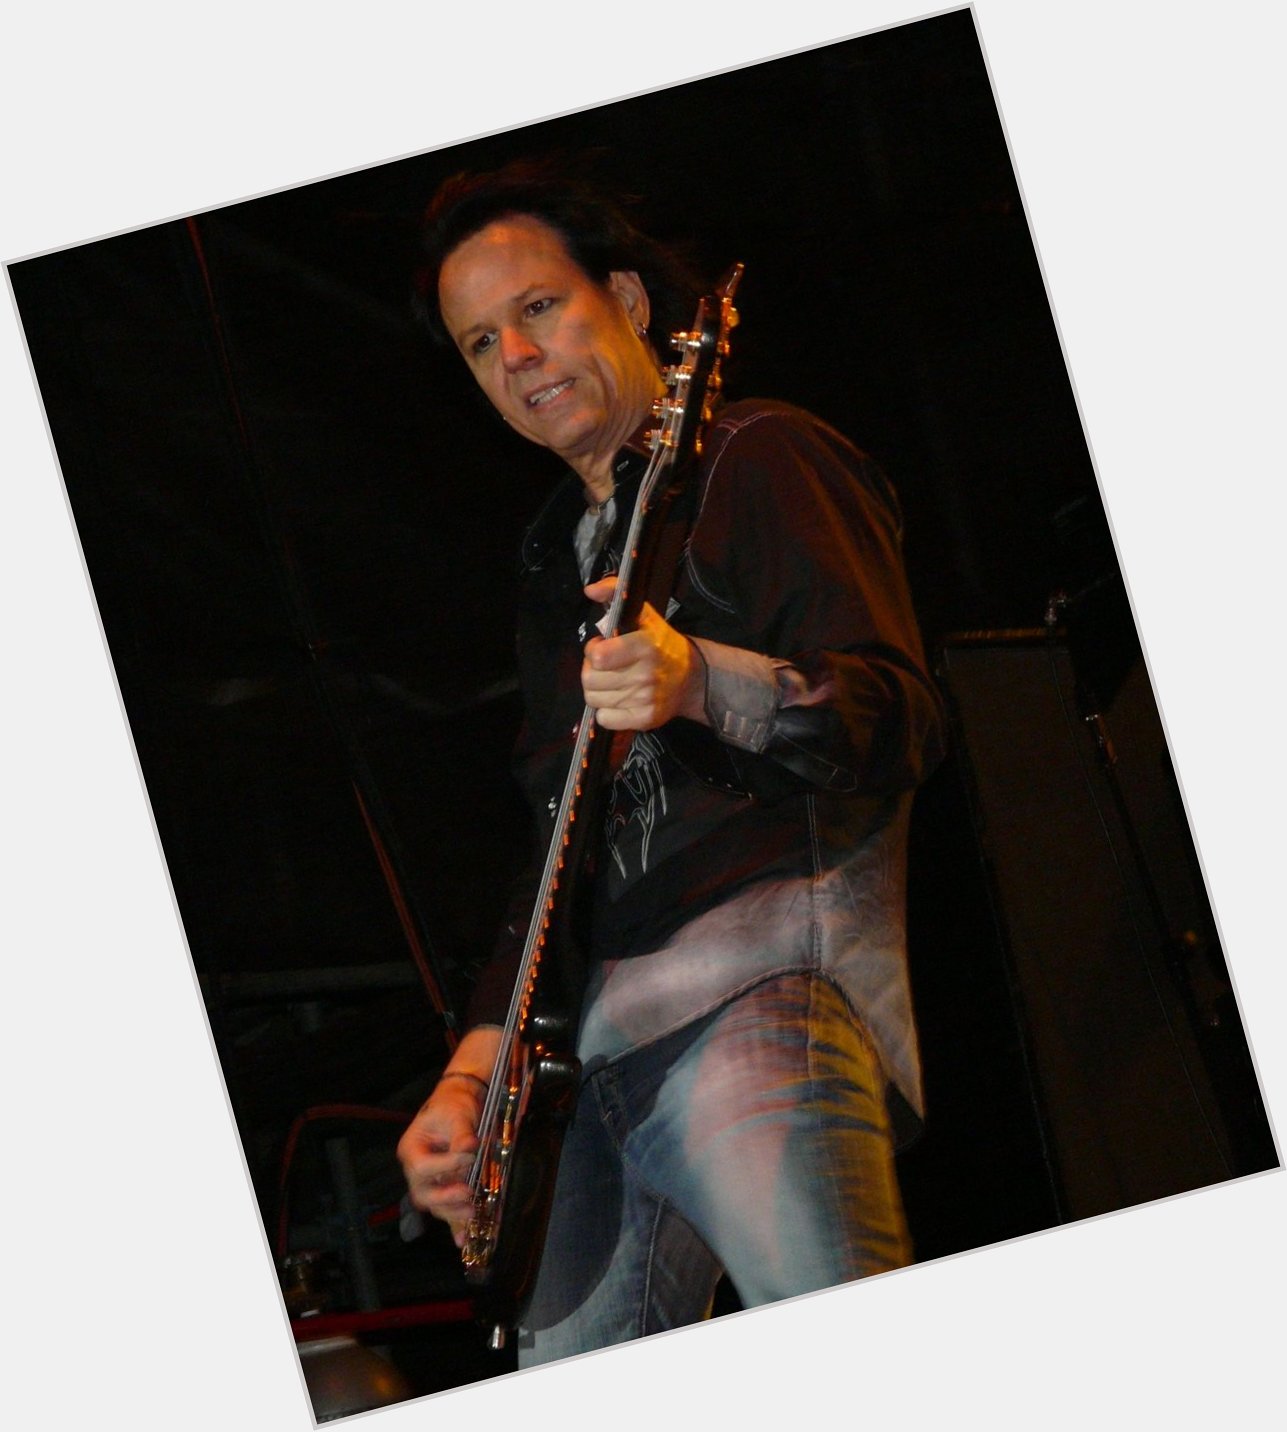 Please join us here at in wishing the one and only Bobby Dall a very Happy 57th Birthday today  